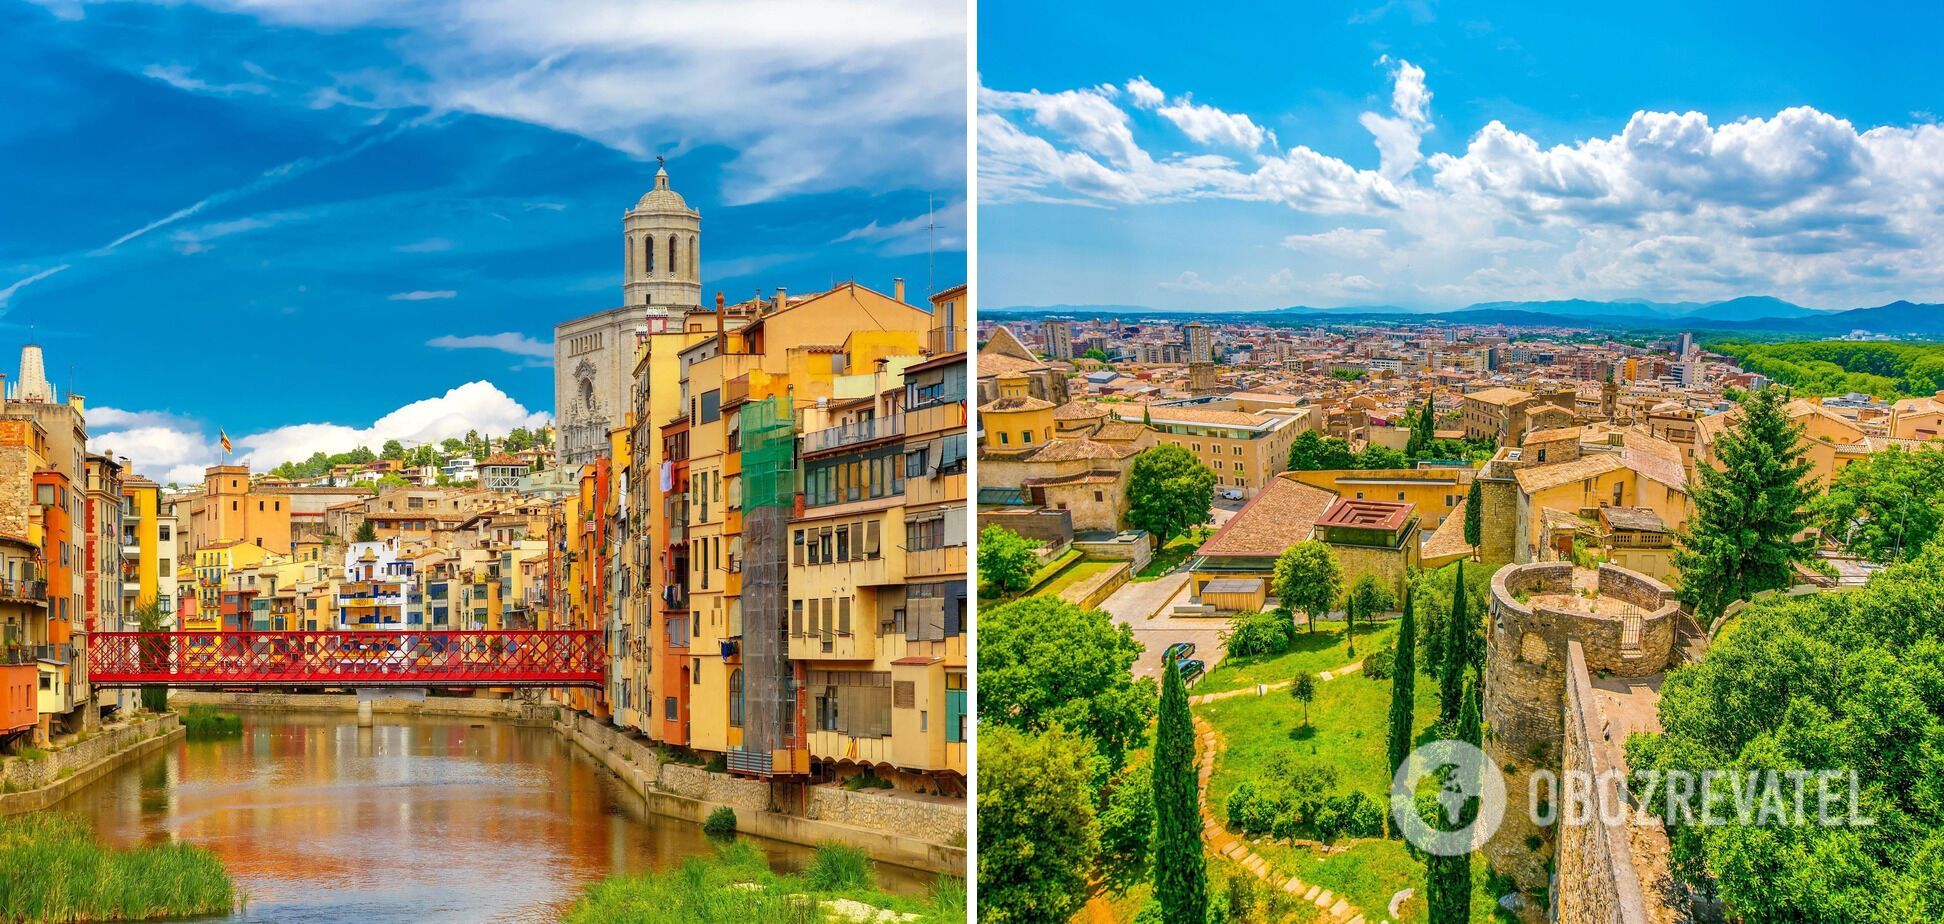 Cheaper and without the crowds. The best alternatives to Venice, Barcelona and other popular tourist destinations have been named